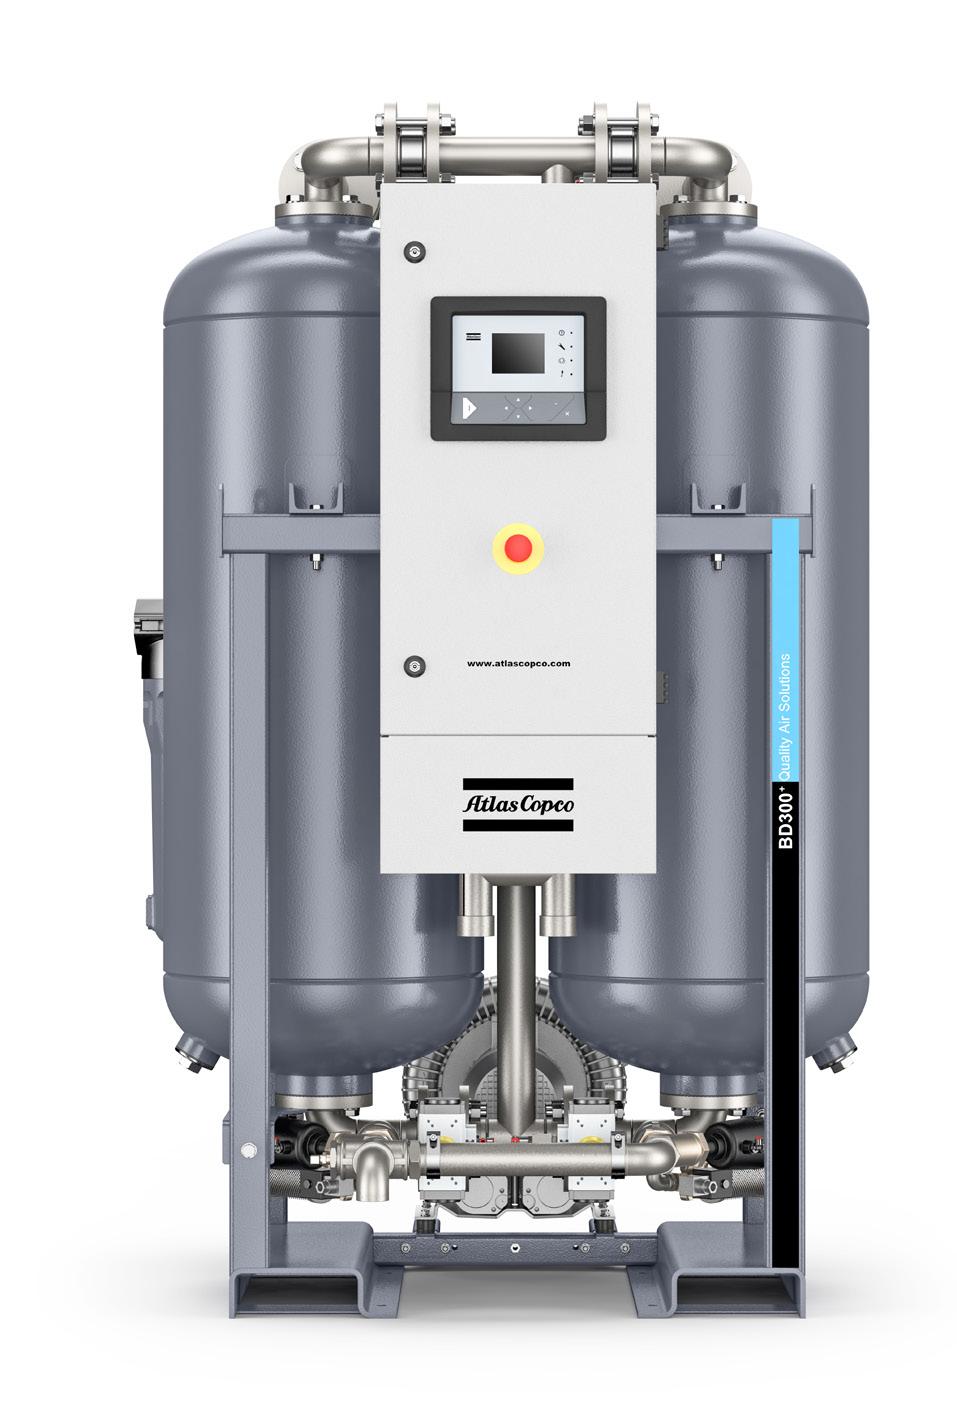 BLOWER PURGE DESICCANT DRYERS BD 100 + -300 + Premium performance & cost-efficiency 4 GALVANIZED PIPING WITH FLANGED CONNECTIONS Flanged piping simplifies maintenance and minimizes the